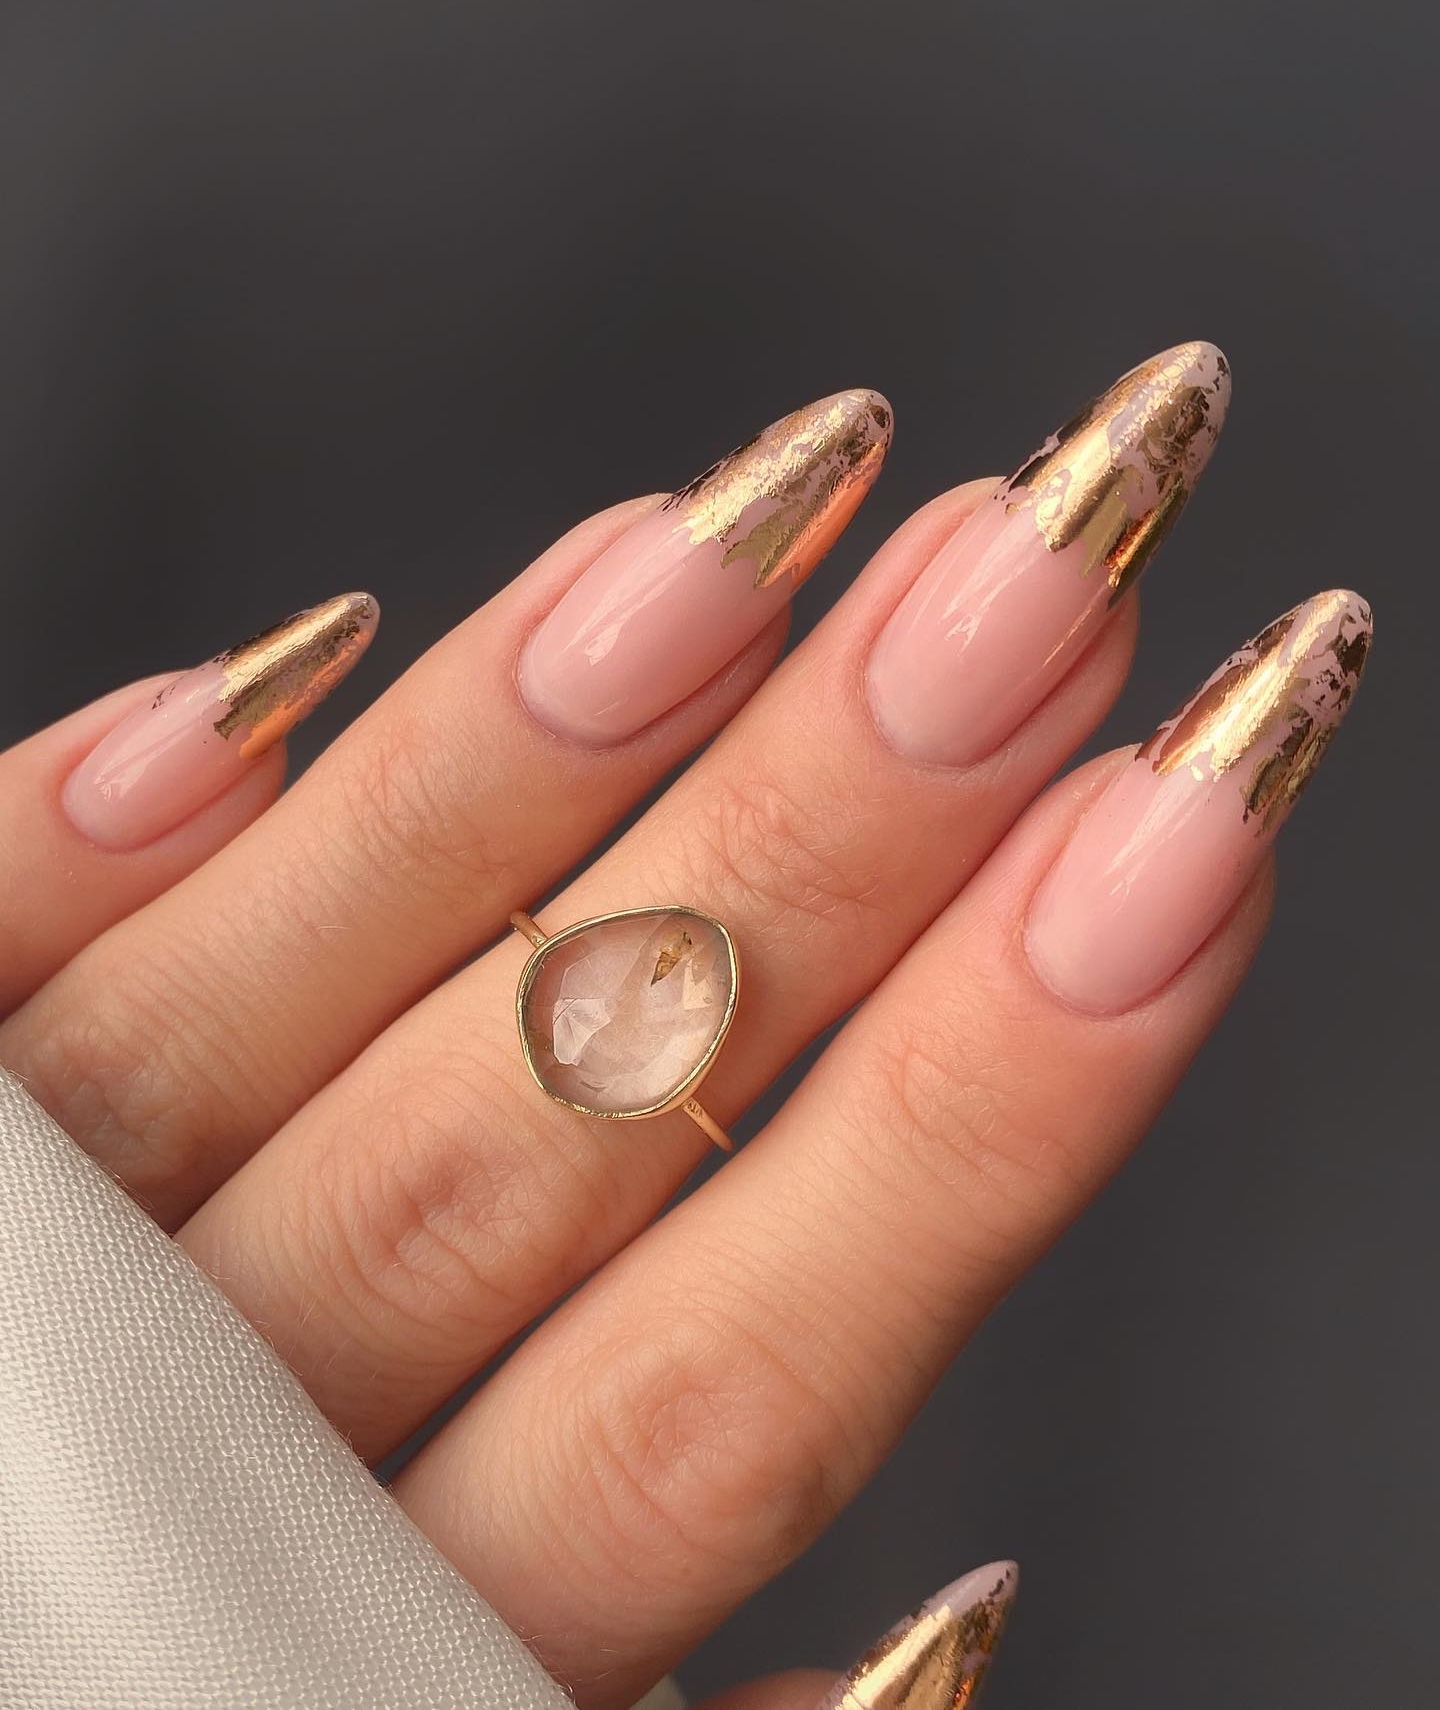 Long Round Gold French Nail Tips